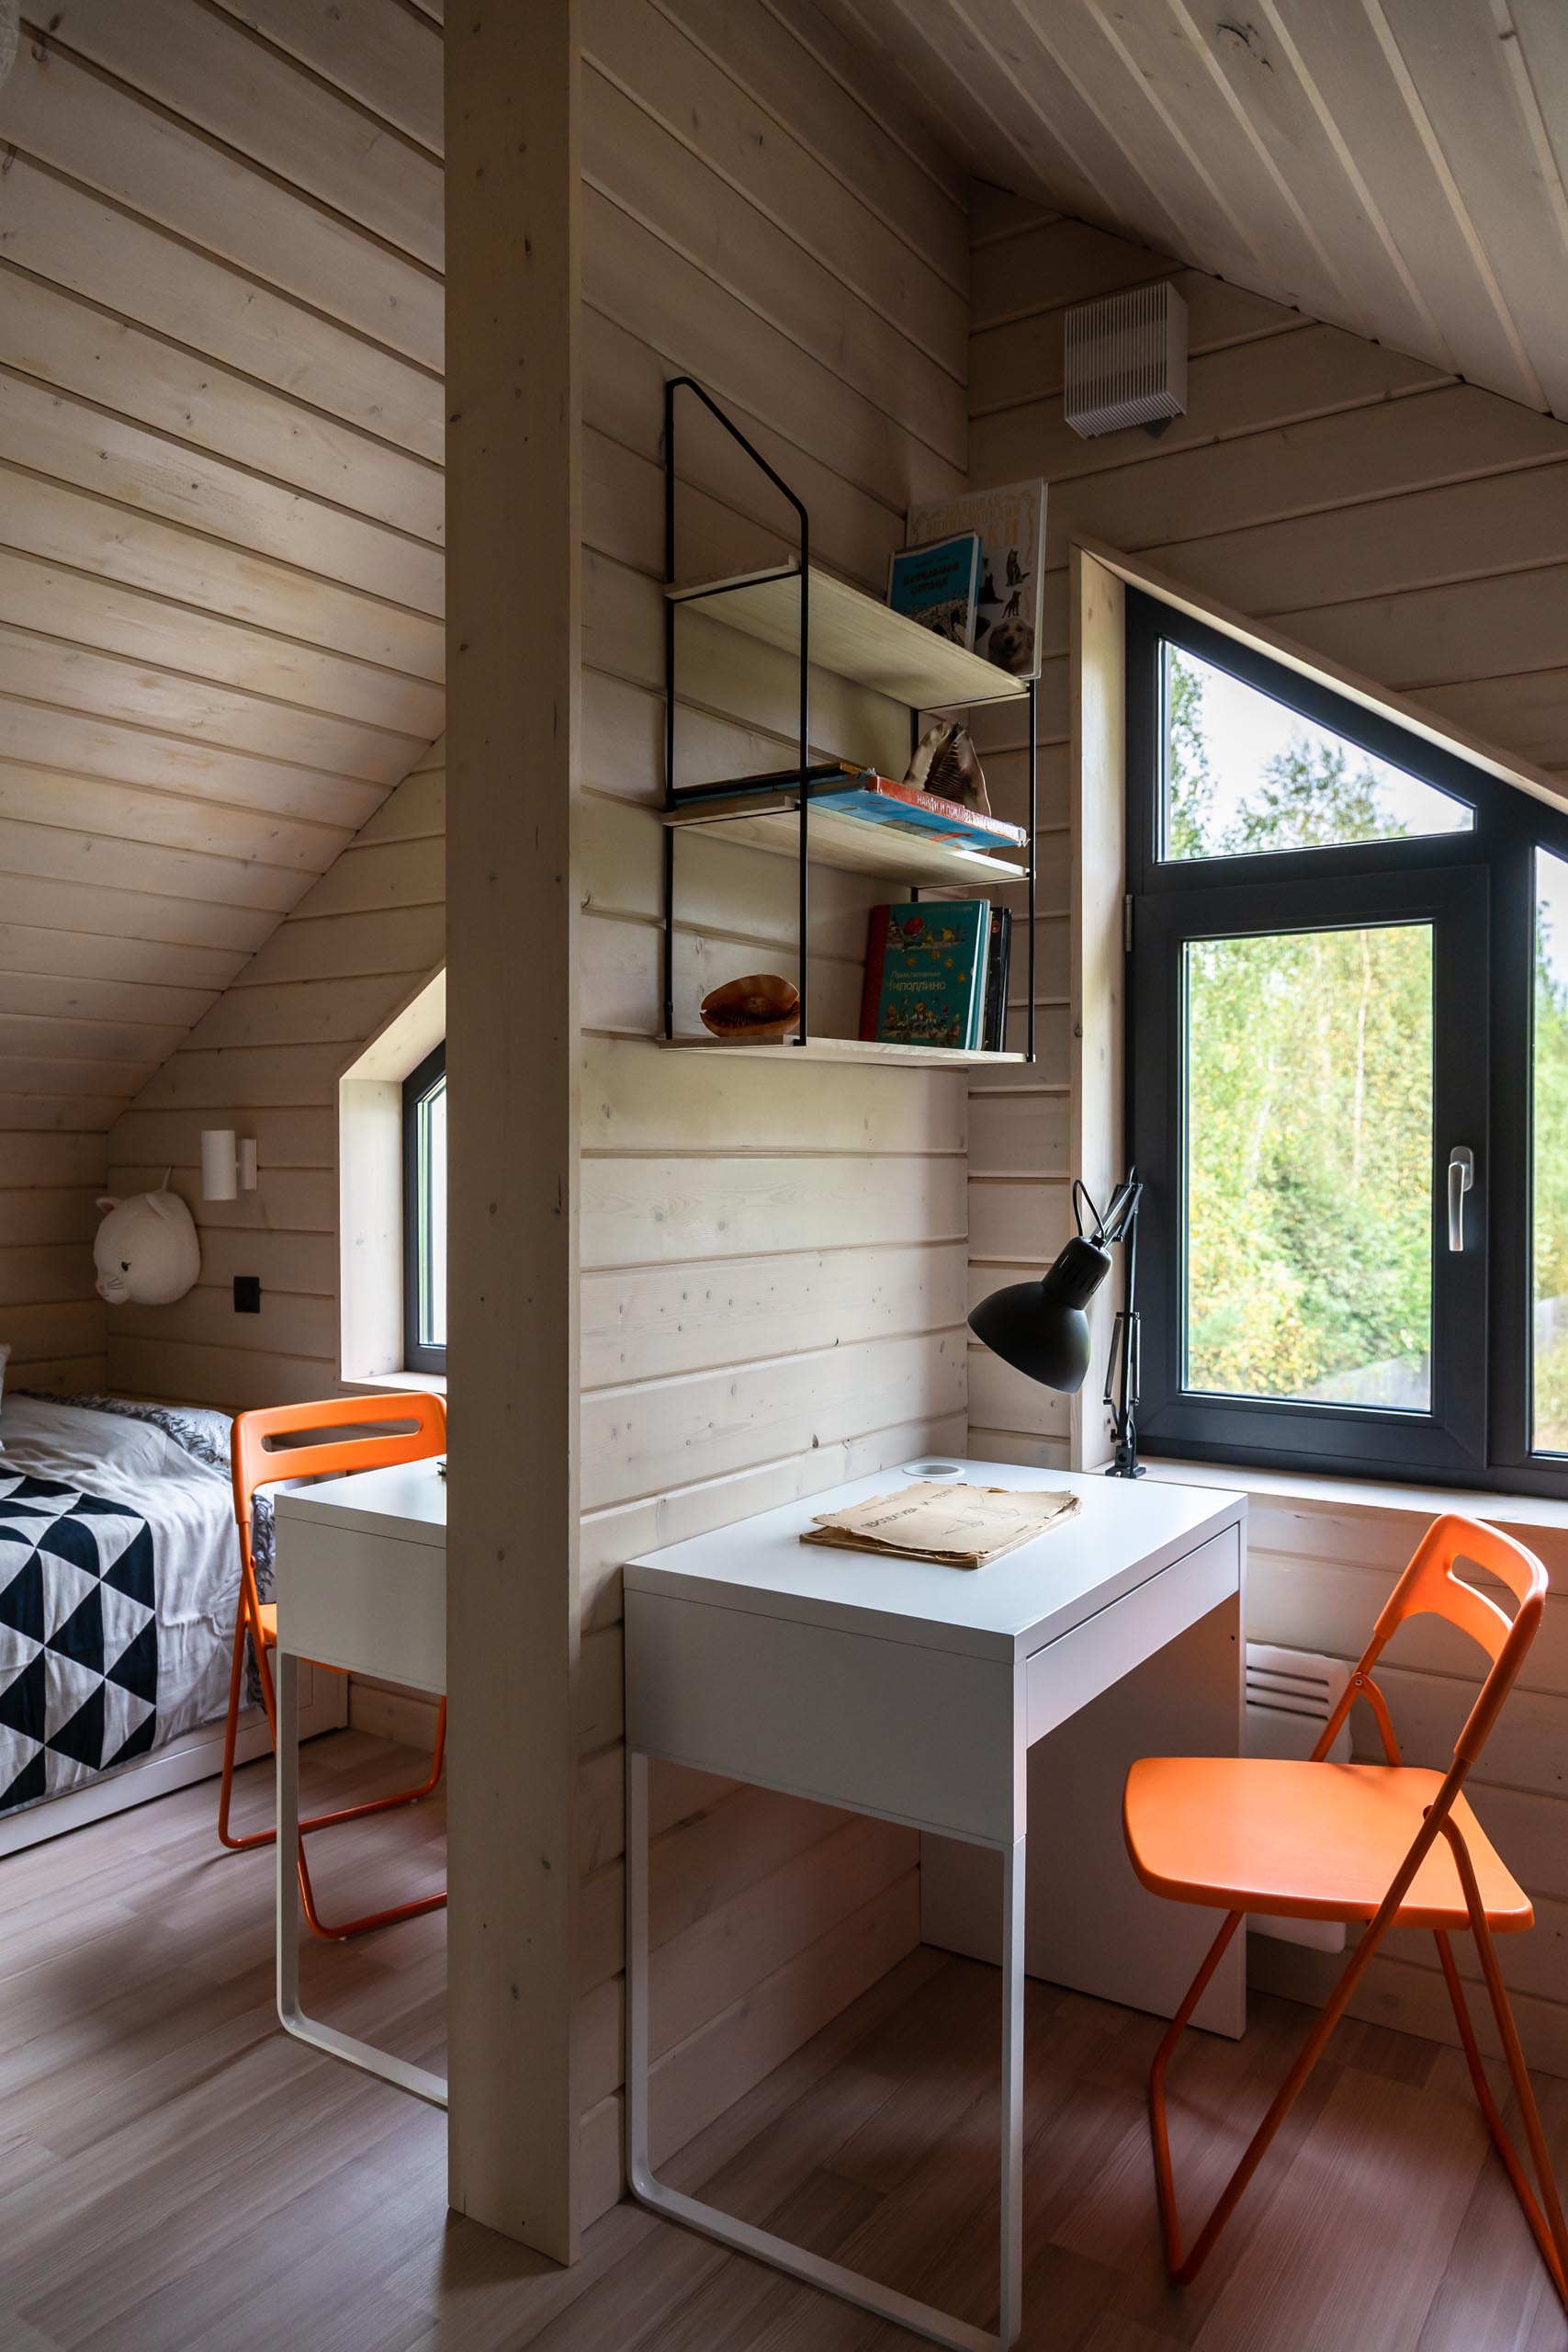 A modern kid's bedroom with tongue and groove wood siding, a white desk, black light, and orange chair.